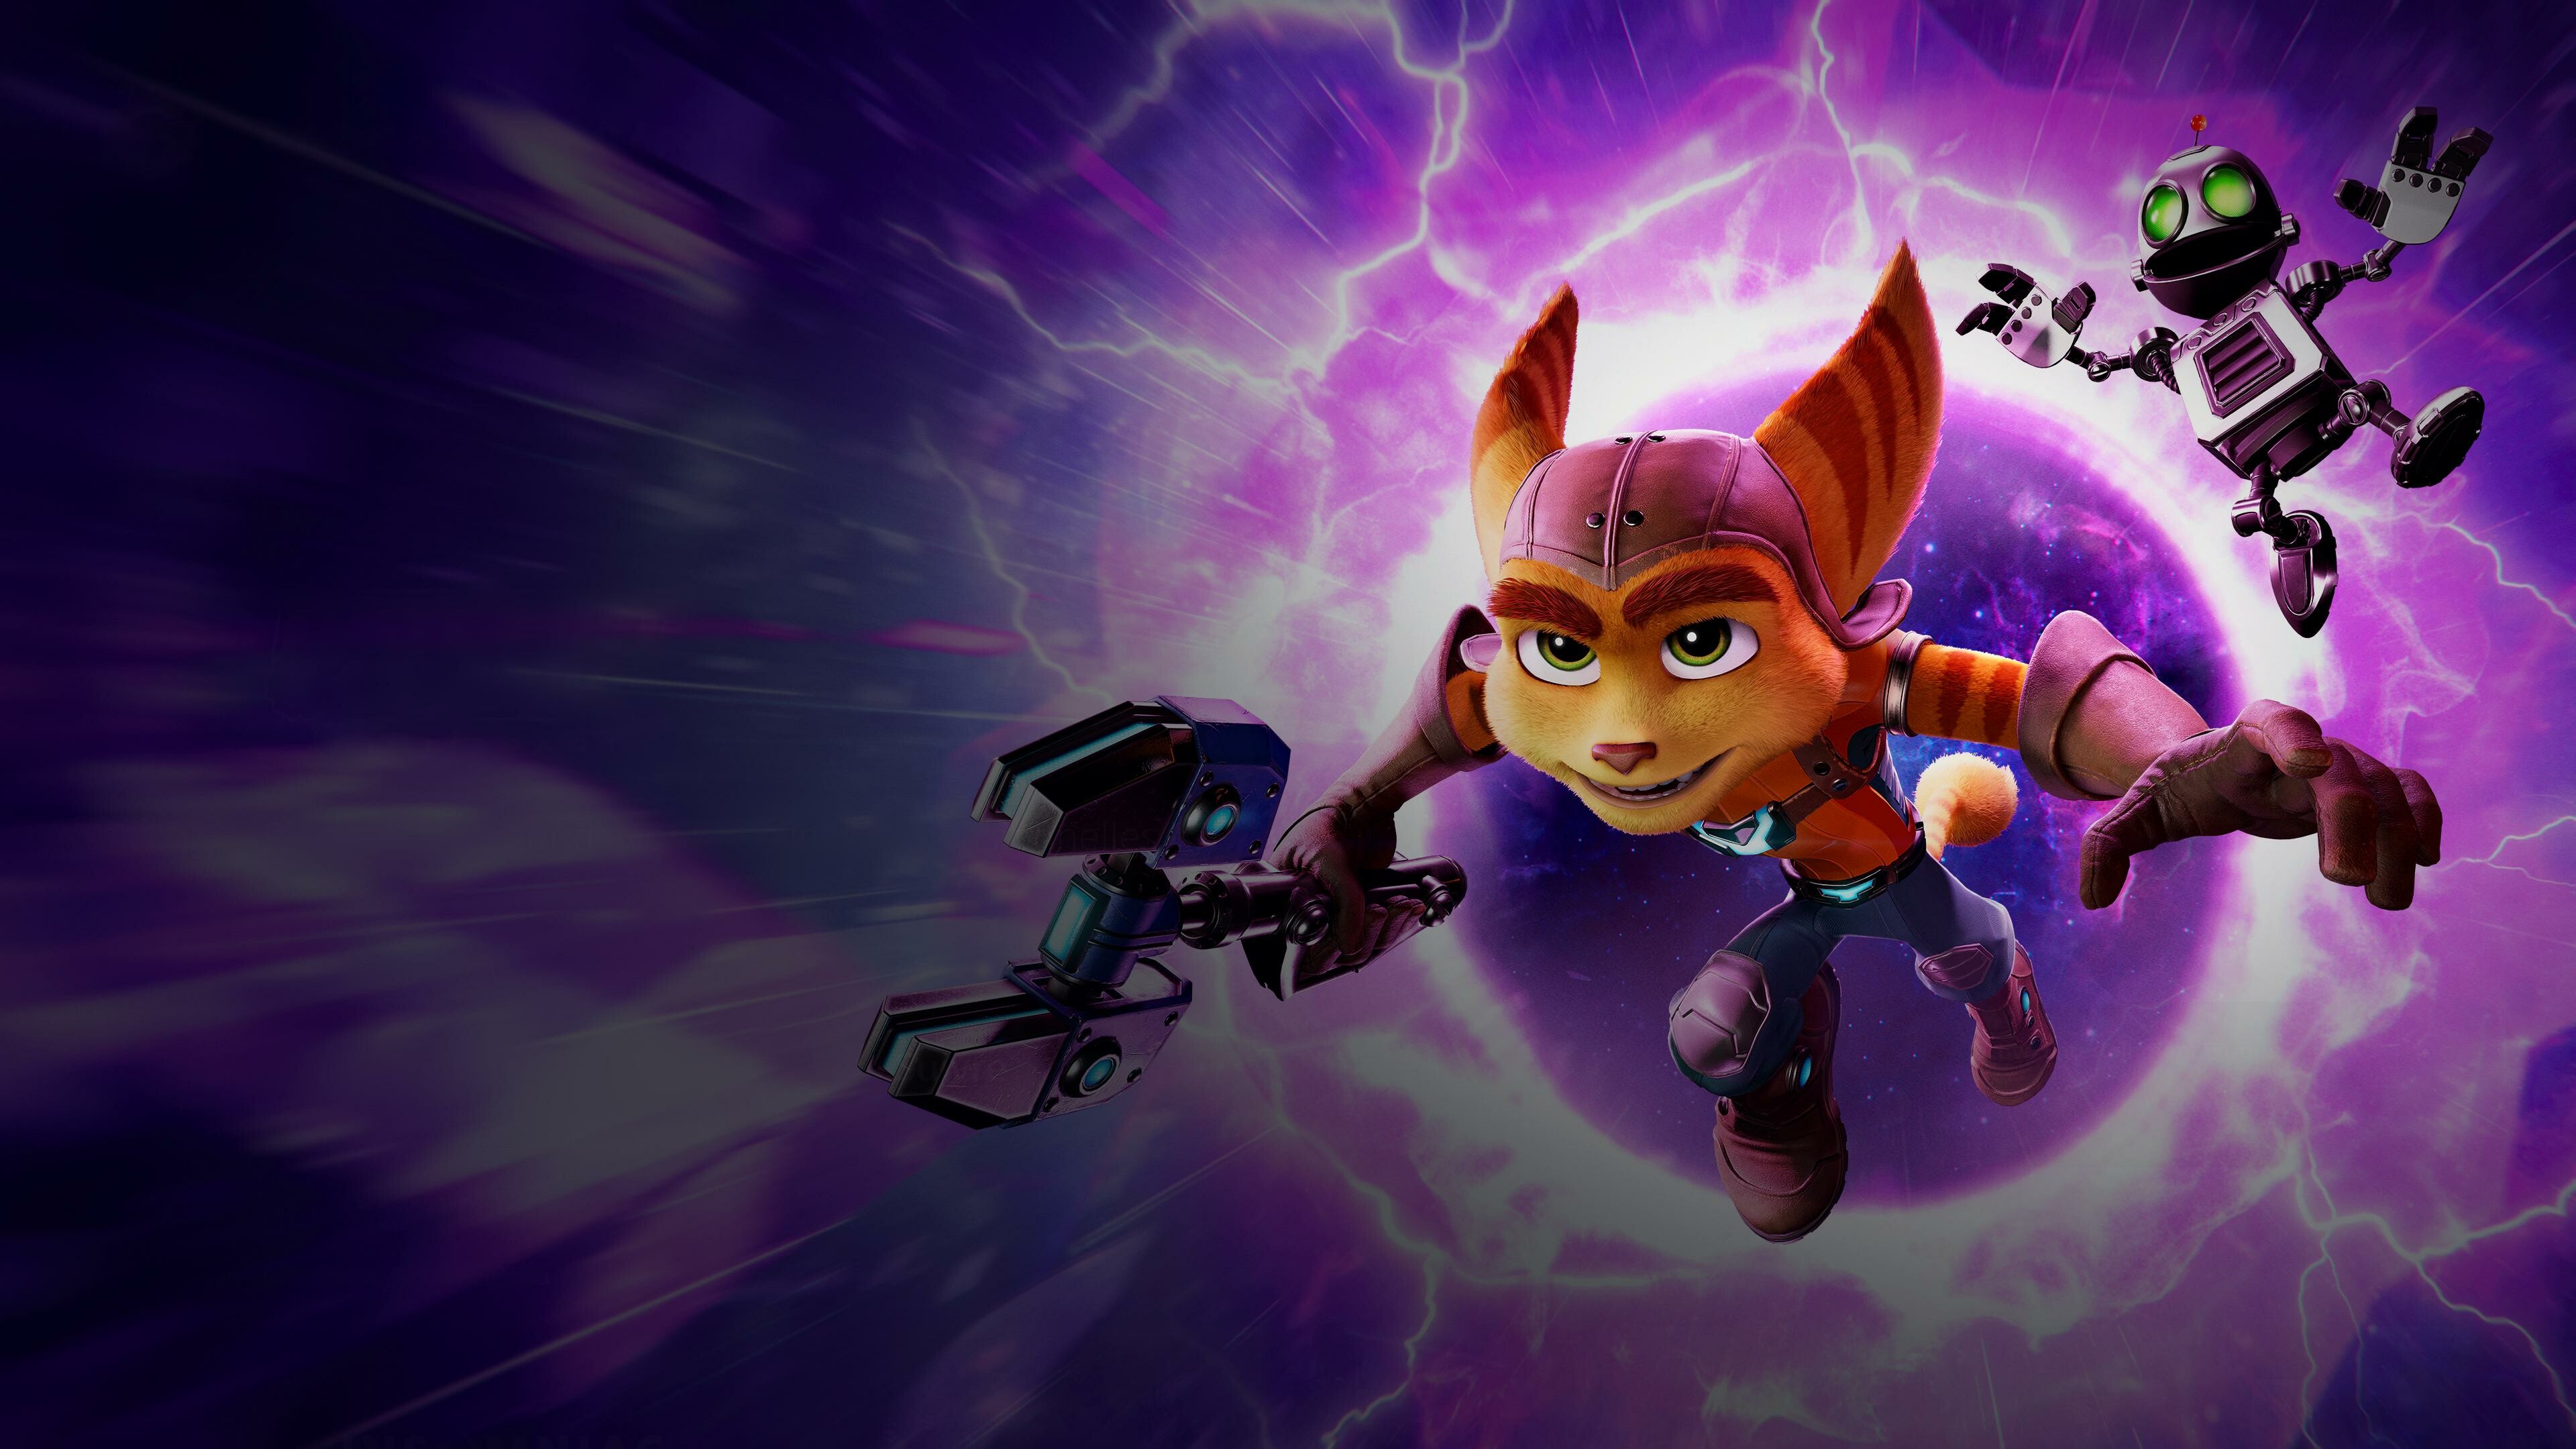 Ratchet and Clank: Rift Apart: A 2021 third-person shooter platform game developed by Insomniac Games. 3840x2160 4K Wallpaper.